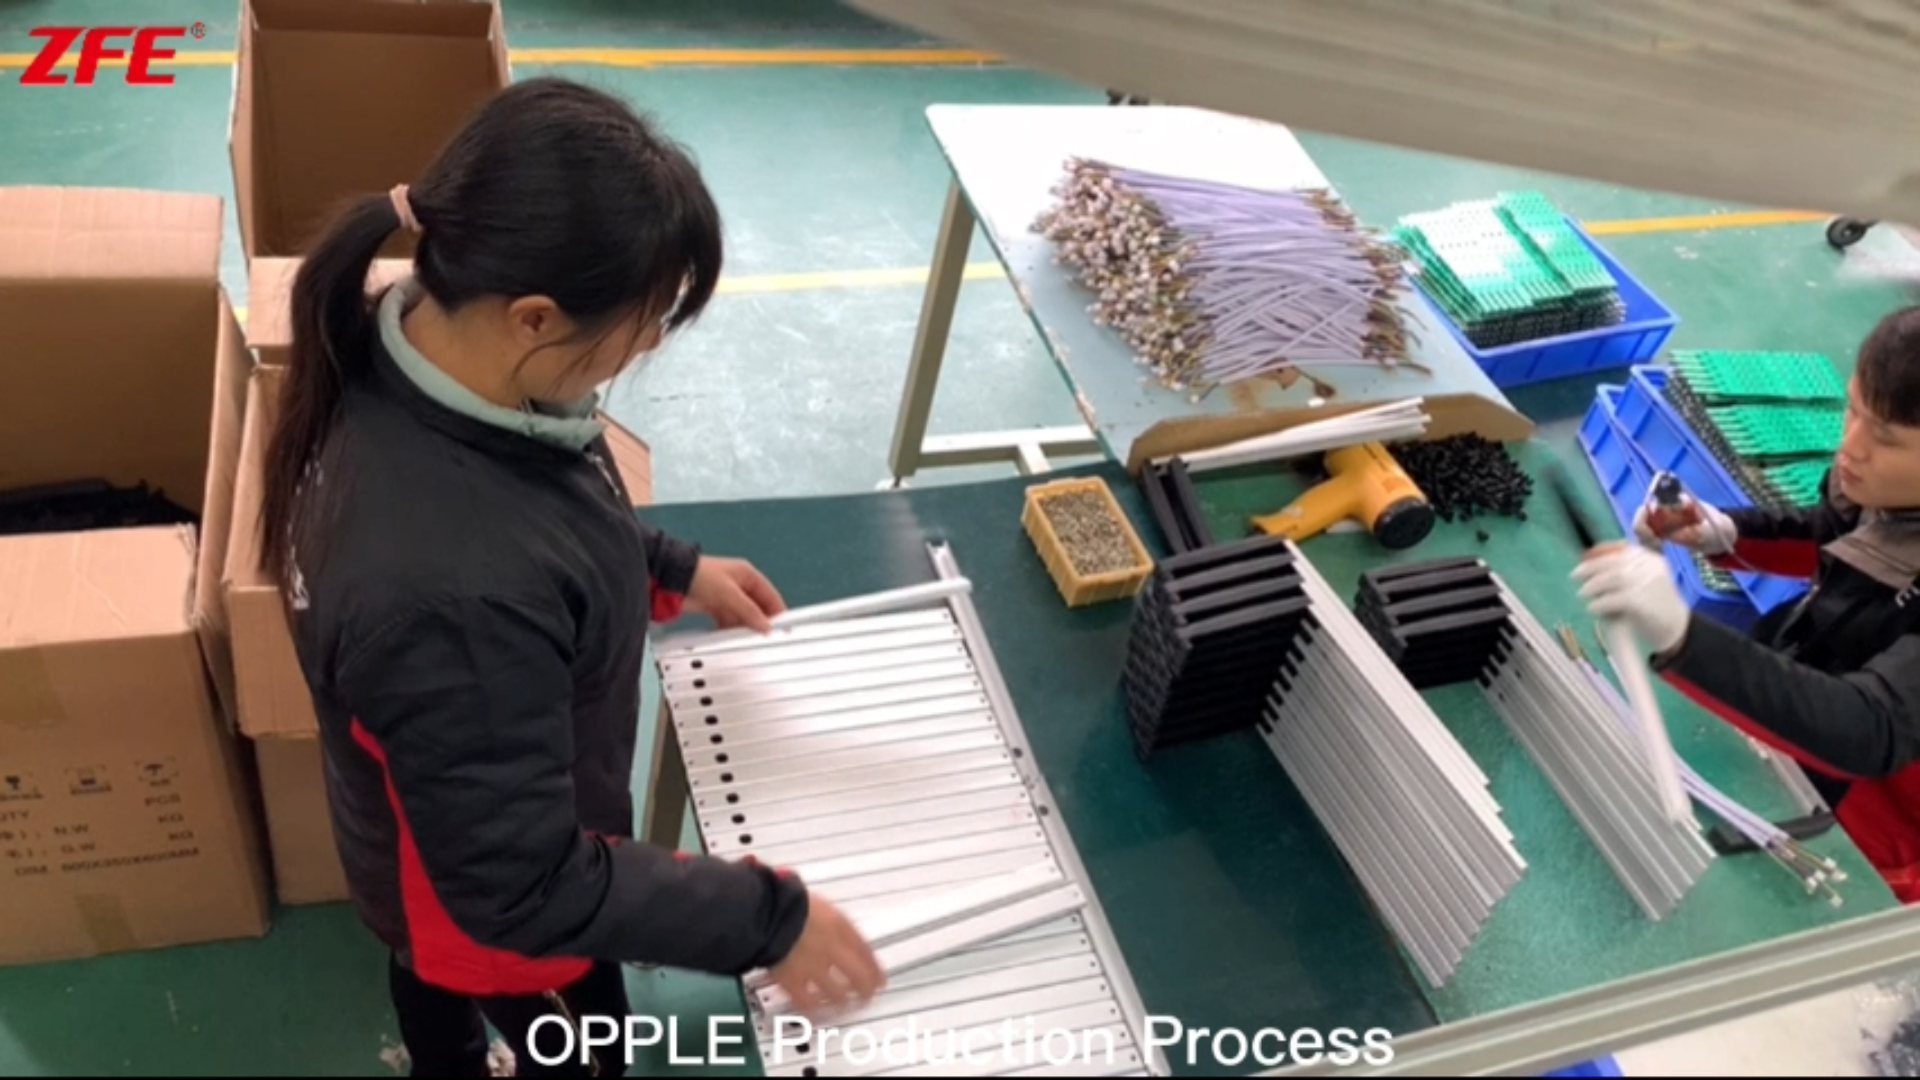 OEM Production Line For OPPLE Branded Product